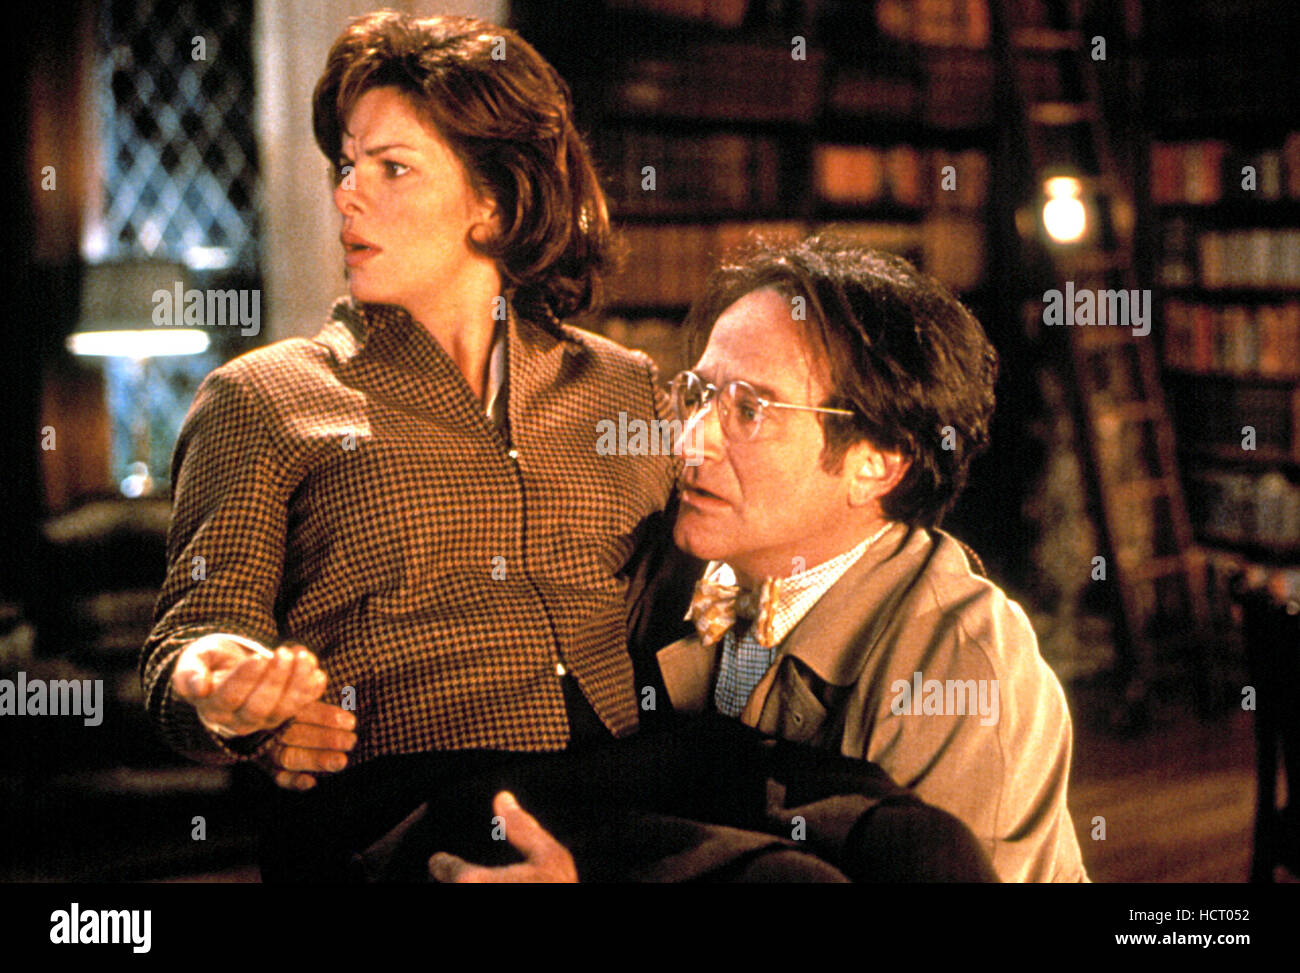 FLUBBER, Marcia Gay Harden, Robin Williams, 1997, (c)Walt Disney  Pictures/courtesy Everett Collection Stock Photo - Alamy